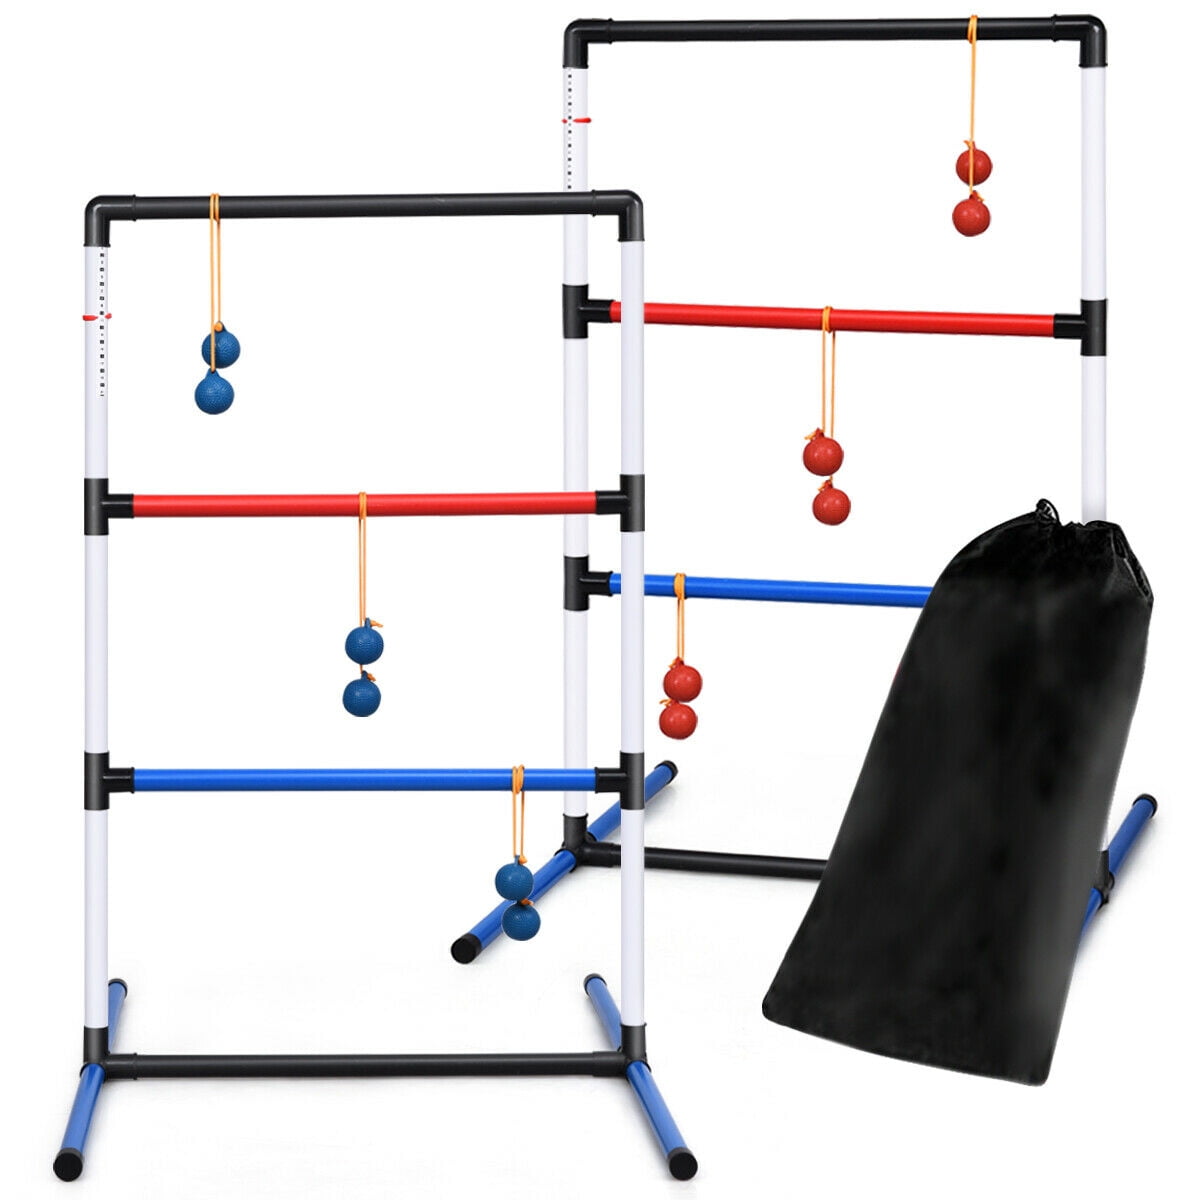 Built-in Score Tracker 6 Toss Bolos with Thick Rope With Backpack Bag Ladder Toss Ball Game Set 2-4 Player Easy Setup Box Shaped Sturdy & Stable Base Ideal for Indoor/Outdoor Game 